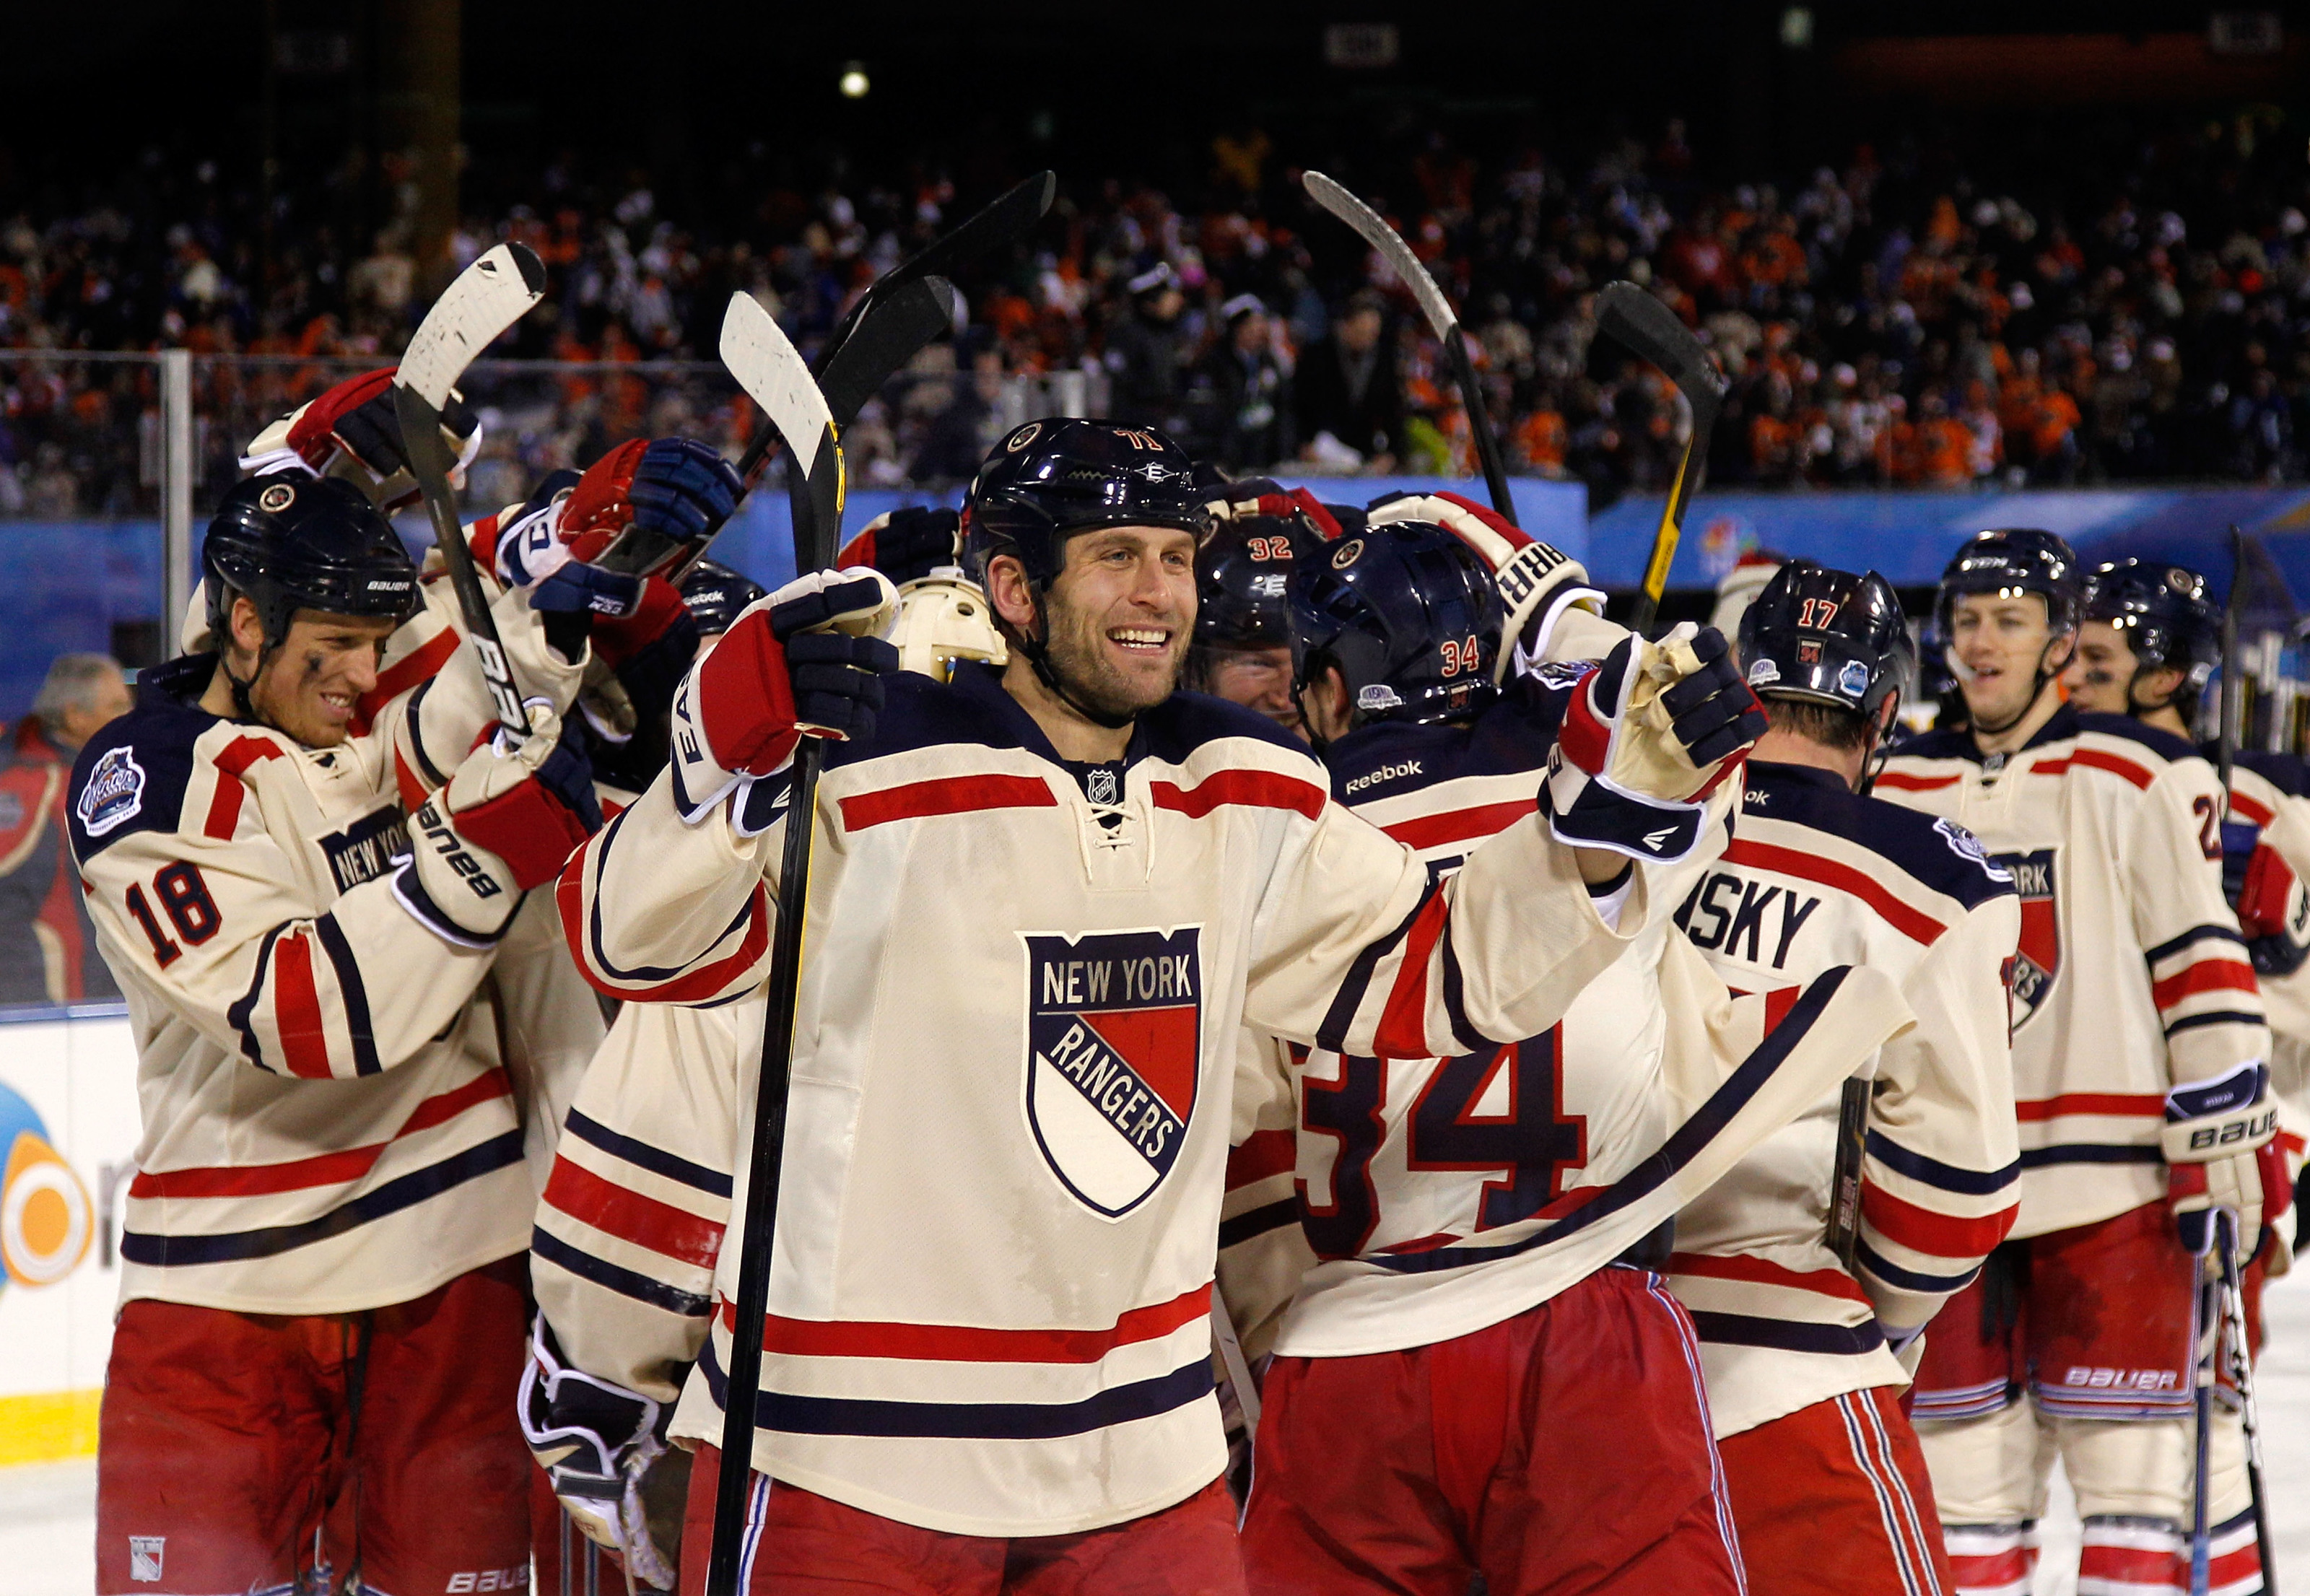 On January 2 in New York Rangers history A Winter Classic for the ages